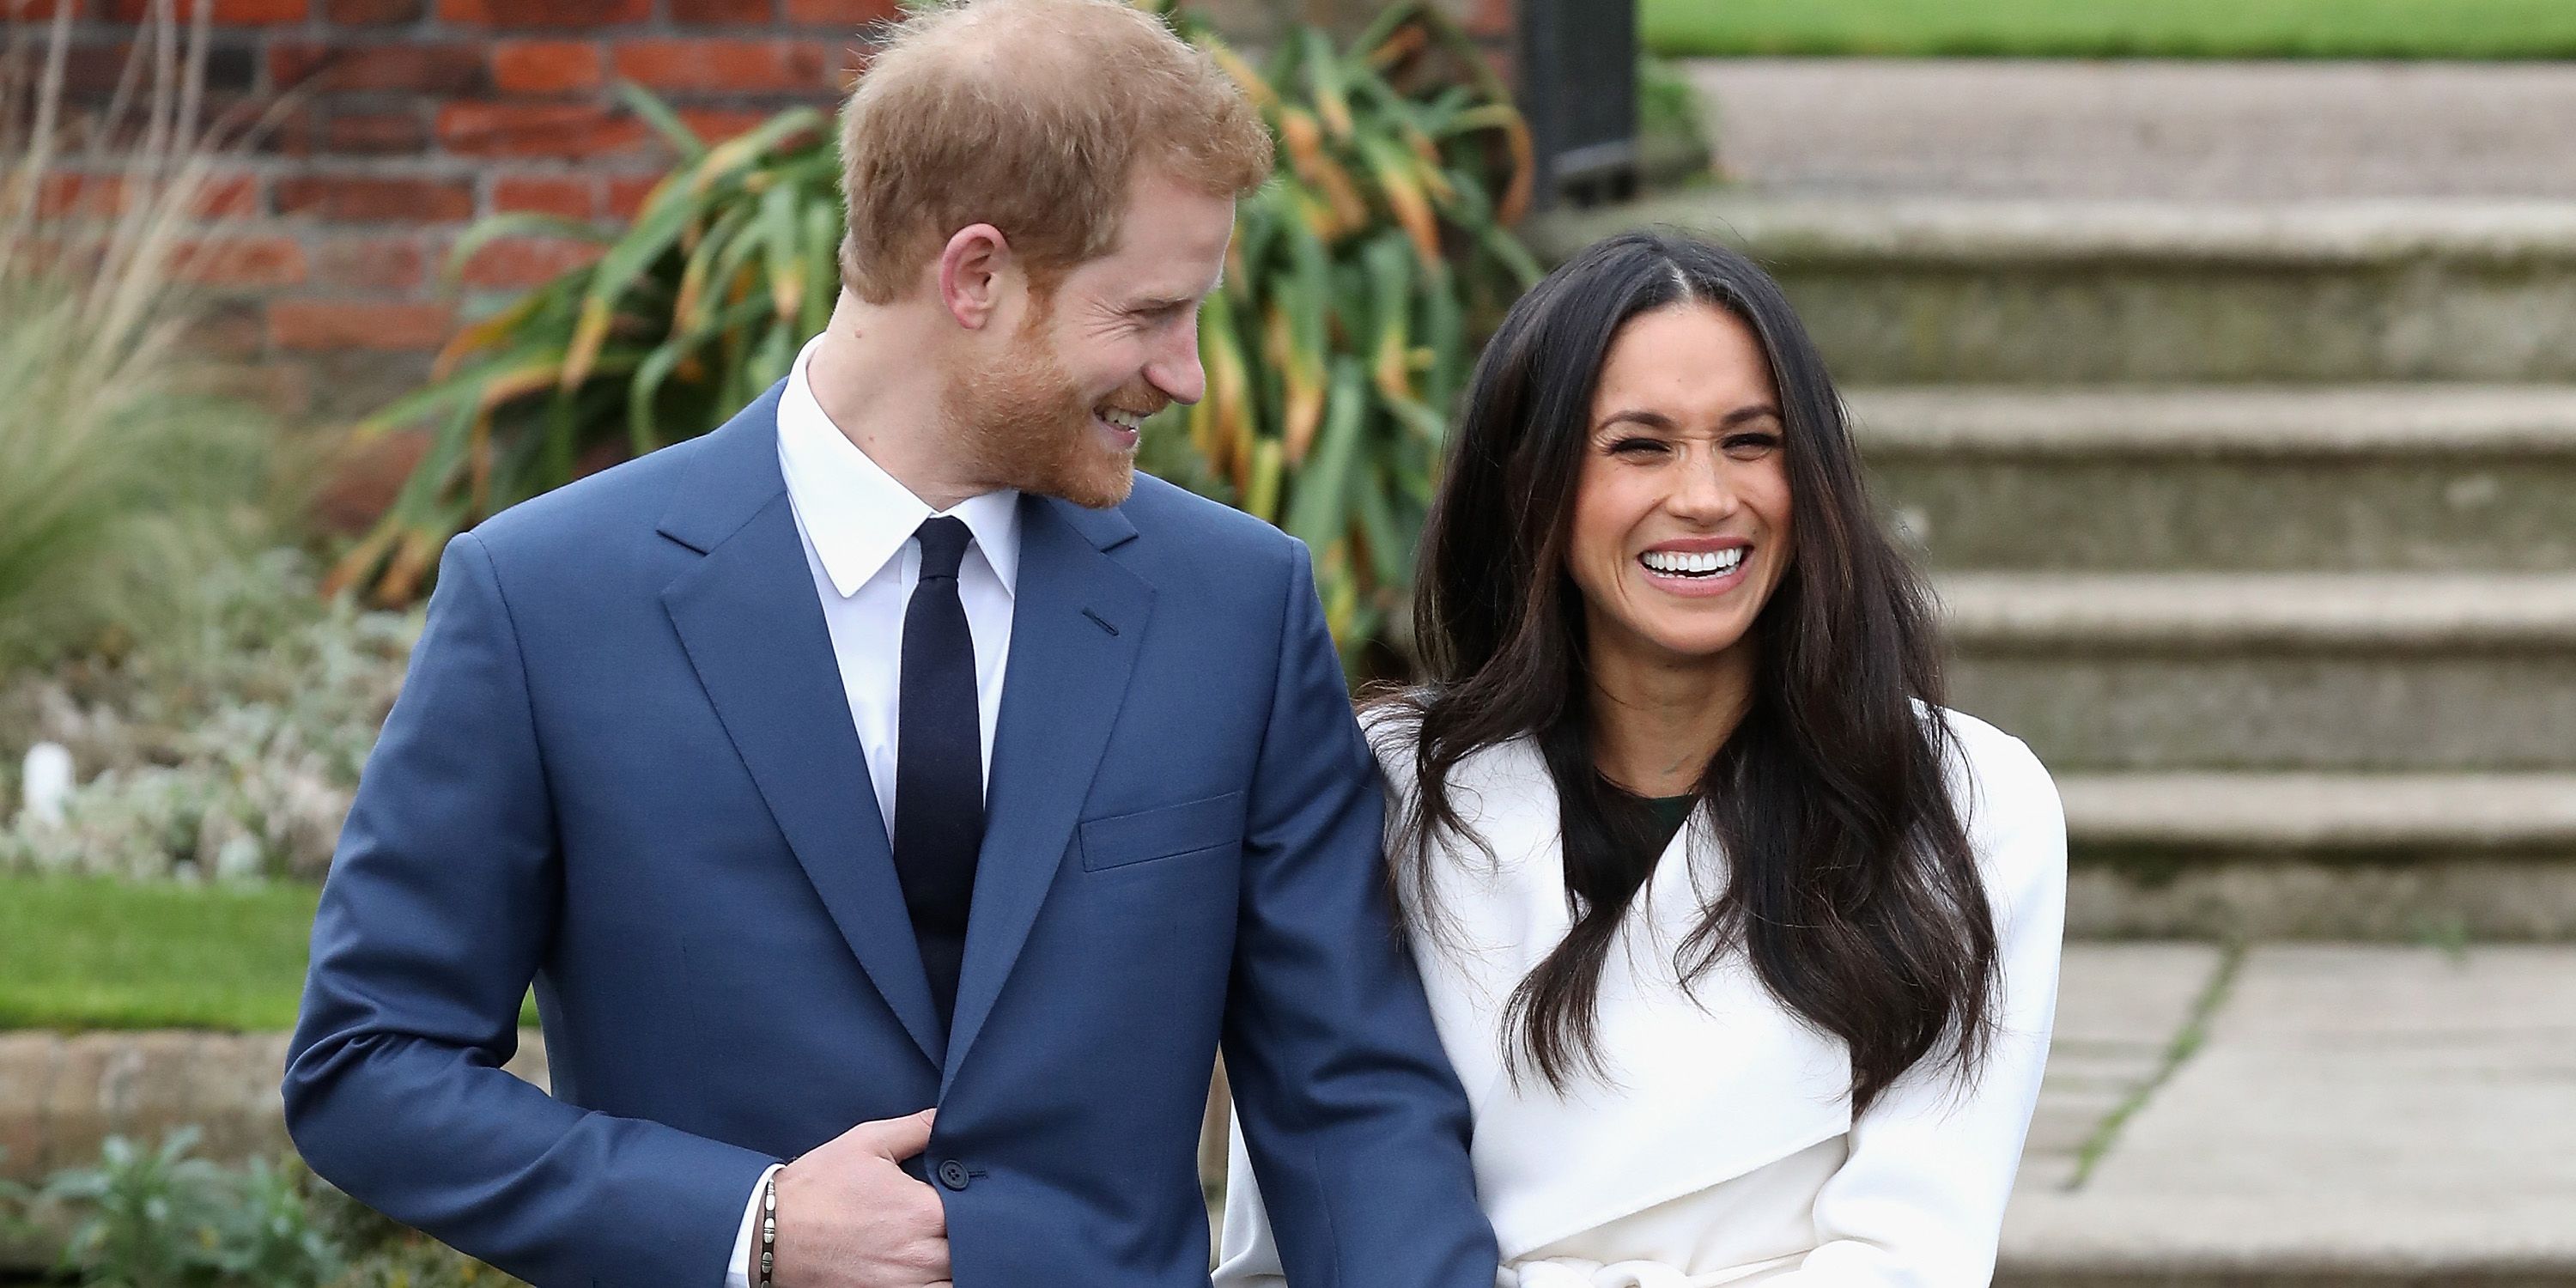 https://hips.hearstapps.com/hmg-prod.s3.amazonaws.com/images/hbz-prince-harry-meghan-markle-cute-moments-gettyimages-880238024-index-1523378902.jpg?crop=1xw:1xh;center,top